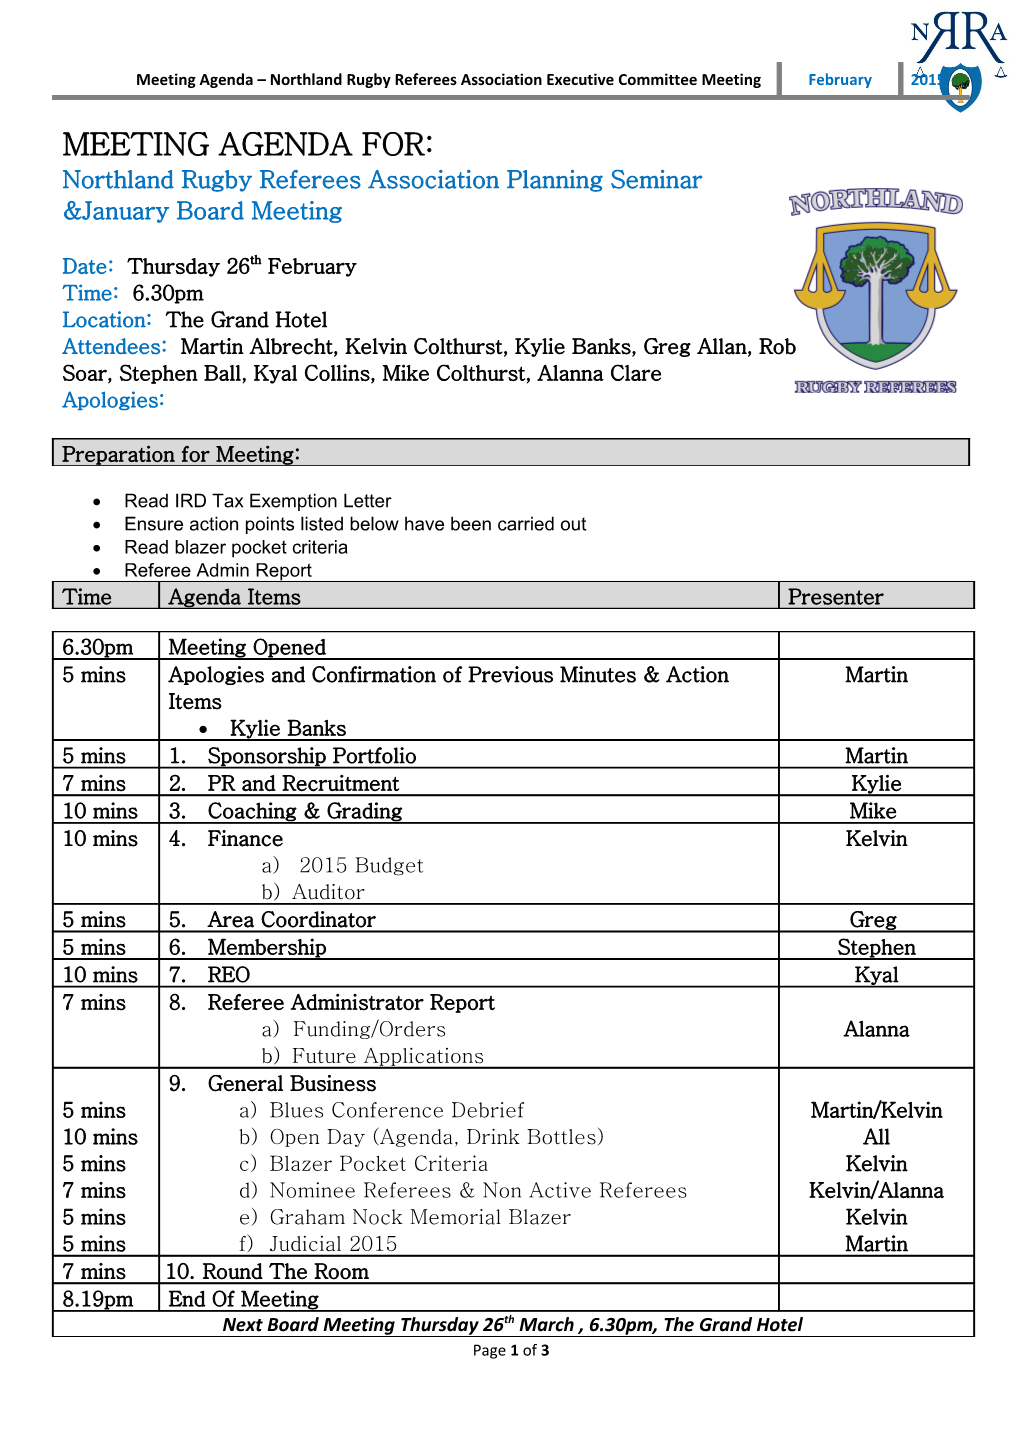 Meeting Agenda Northland Rugby Referees Association Executive Committee Meeting